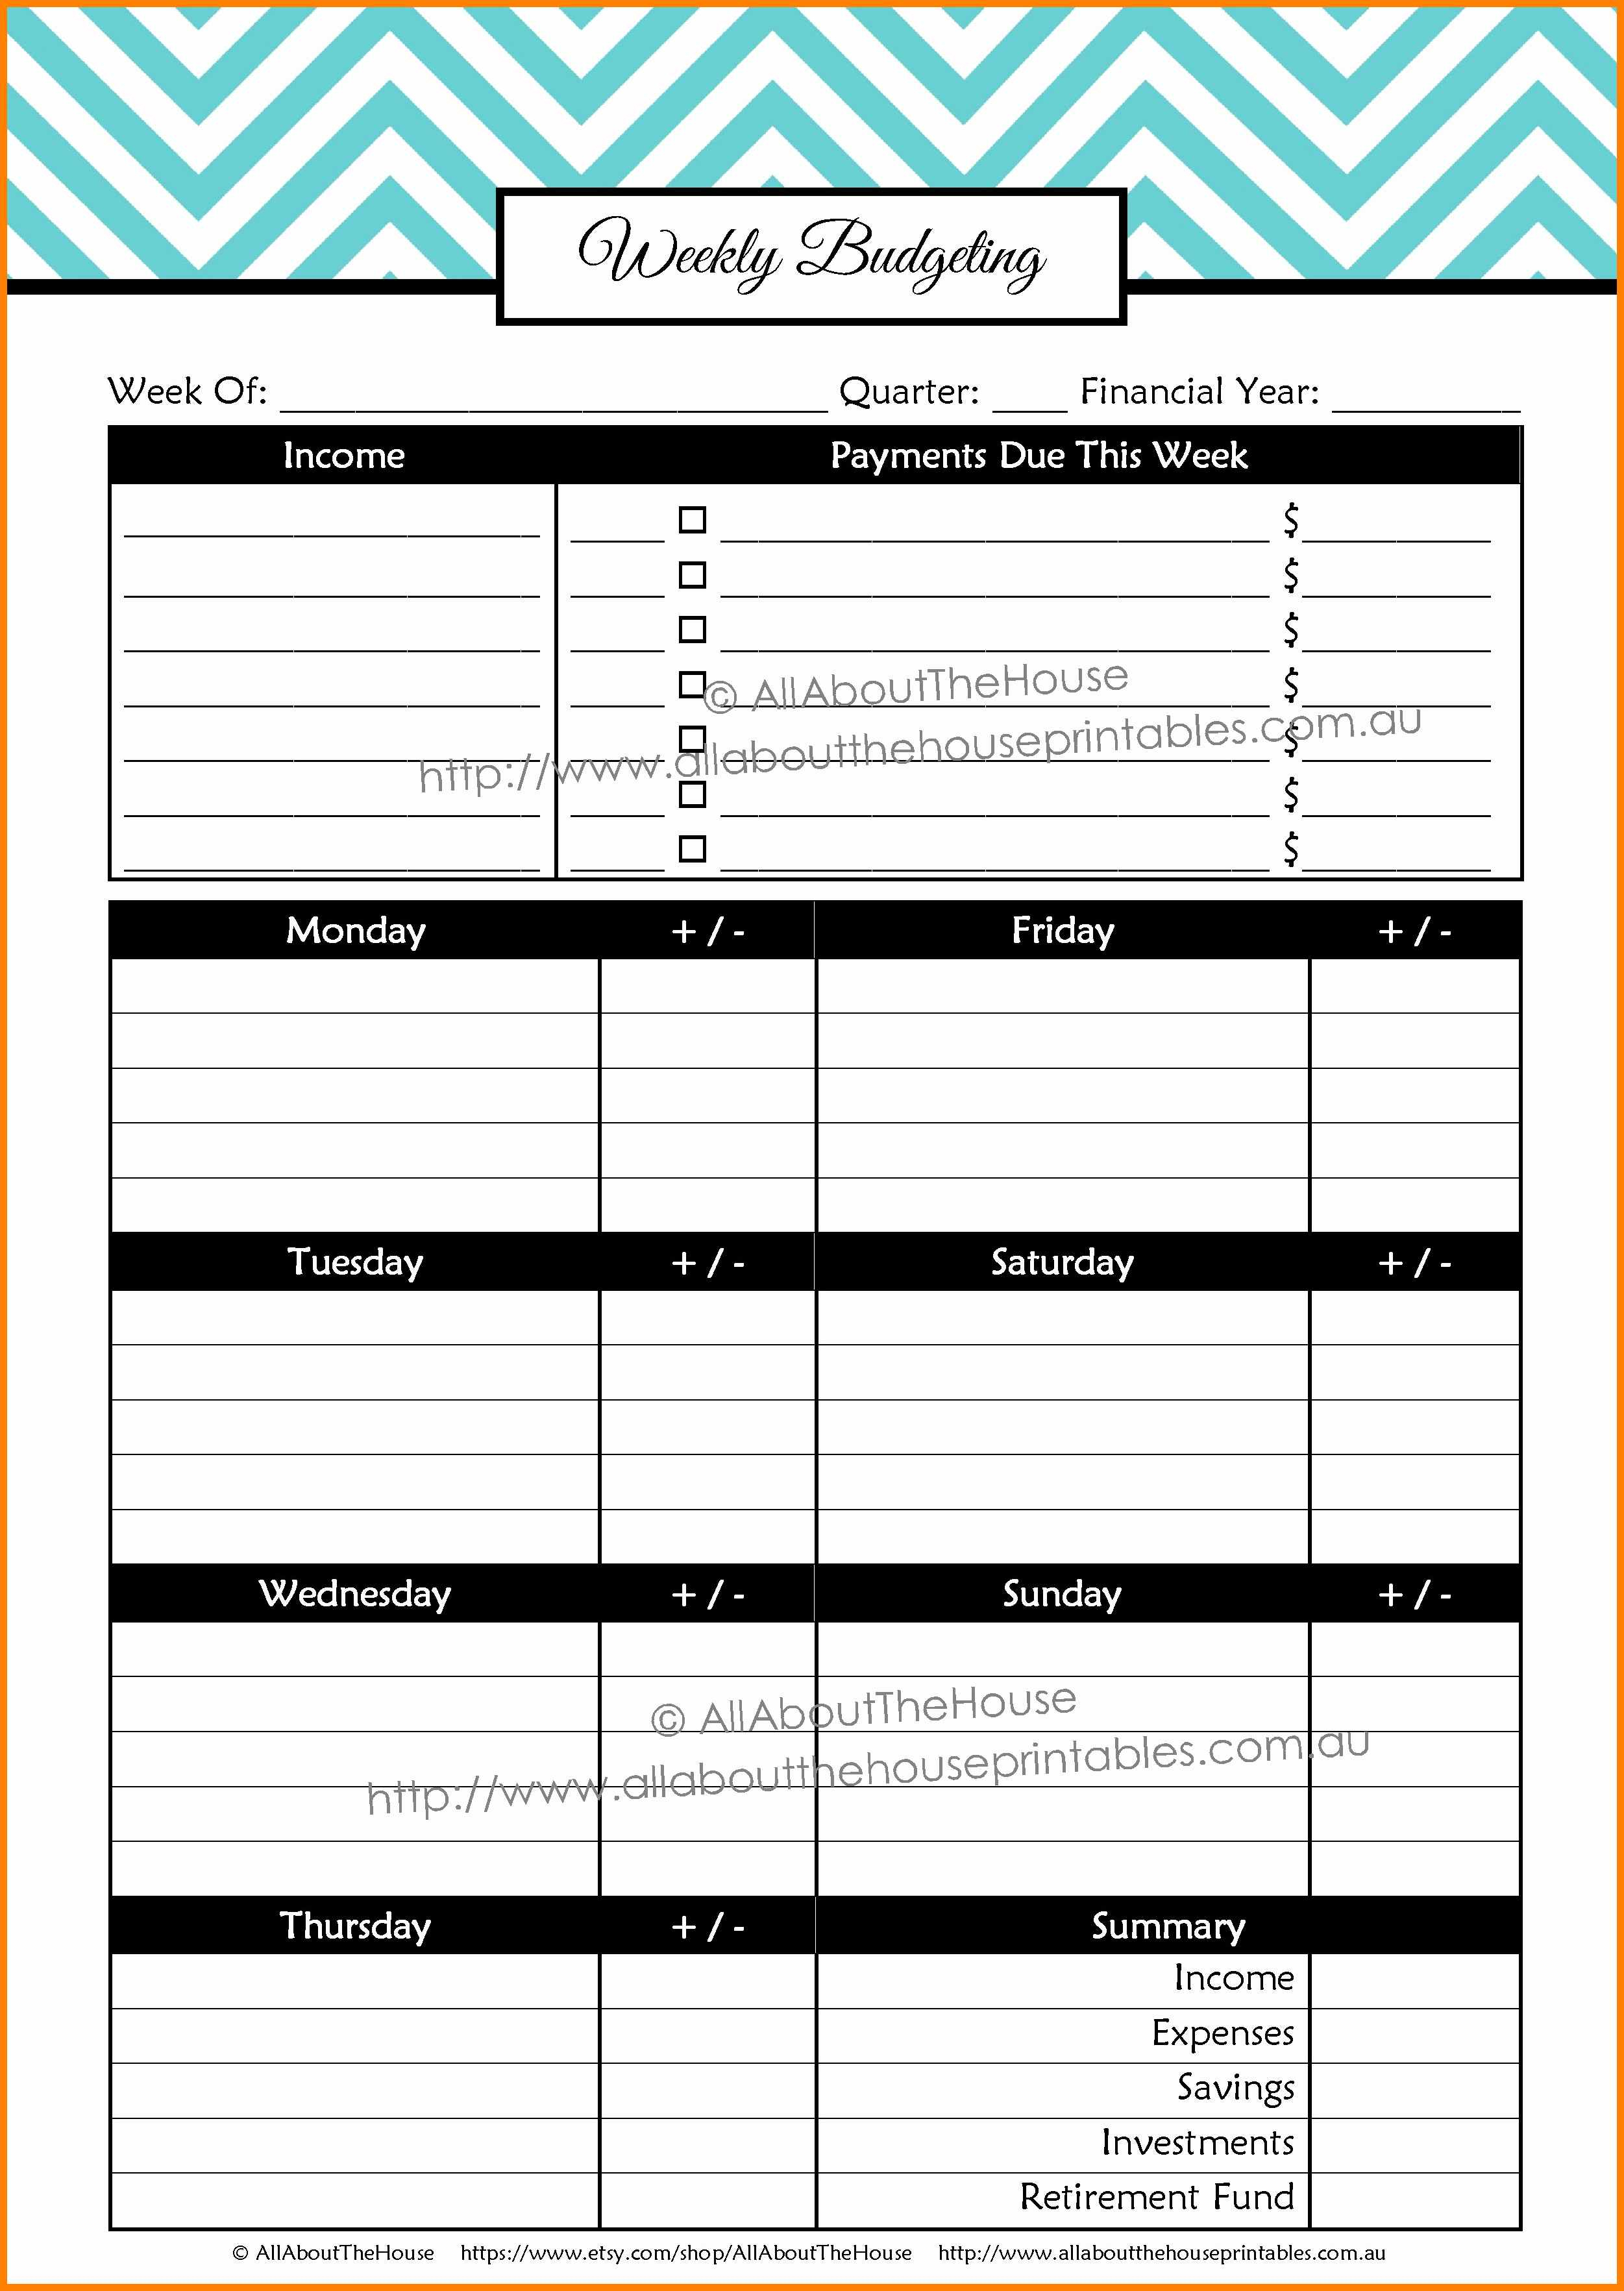 Free Bill Management Spreadsheet With 13+ Free Bill Management Spreadsheet  Credit Spreadsheet